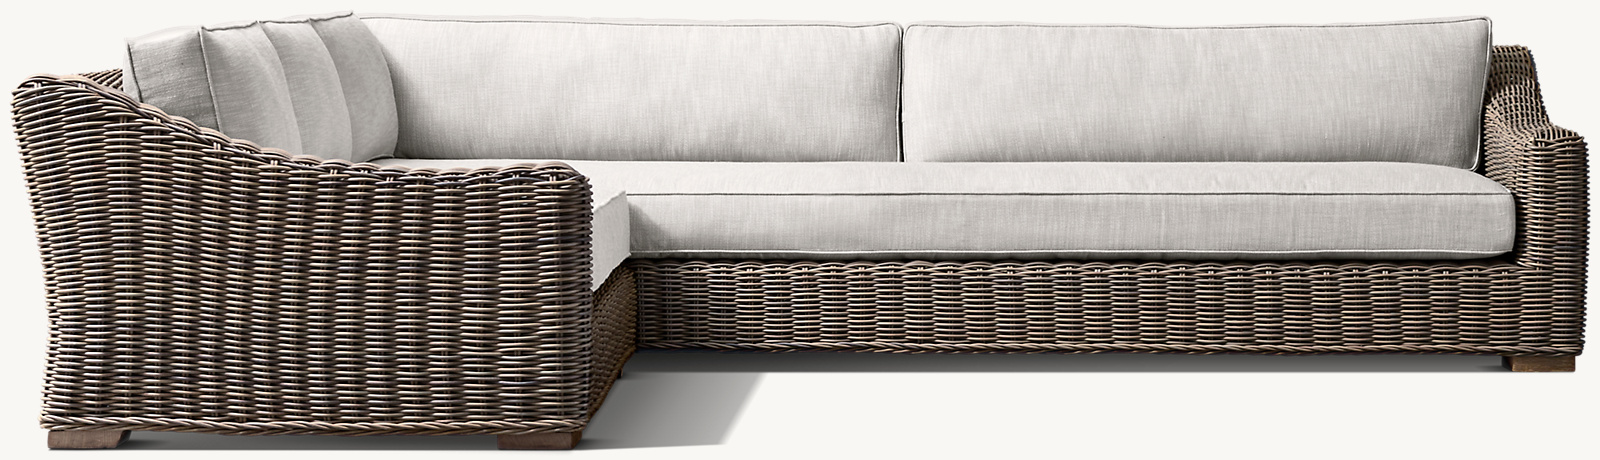 Shown in Terra. Cushions (sold separately) shown in Dove Perennials&#174; Performance Textured Linen Weave. Sectional consists of 1 two-seat left-arm sofa and 1 four-seat right-arm return sofa.